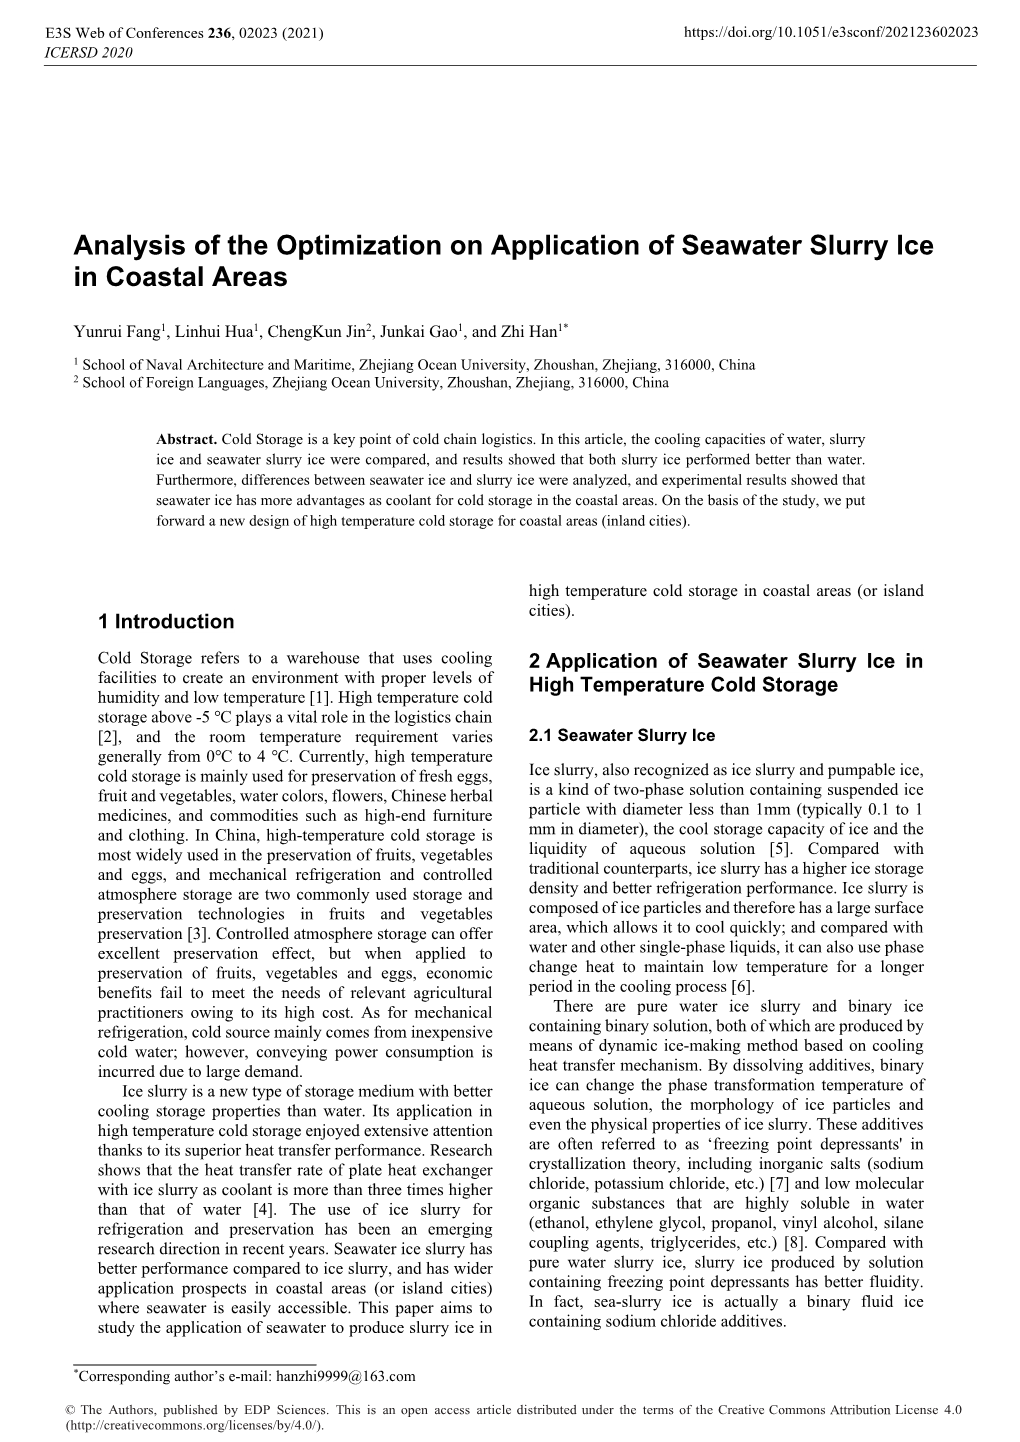 Analysis of the Optimization on Application of Seawater Slurry Ice in Coastal Areas